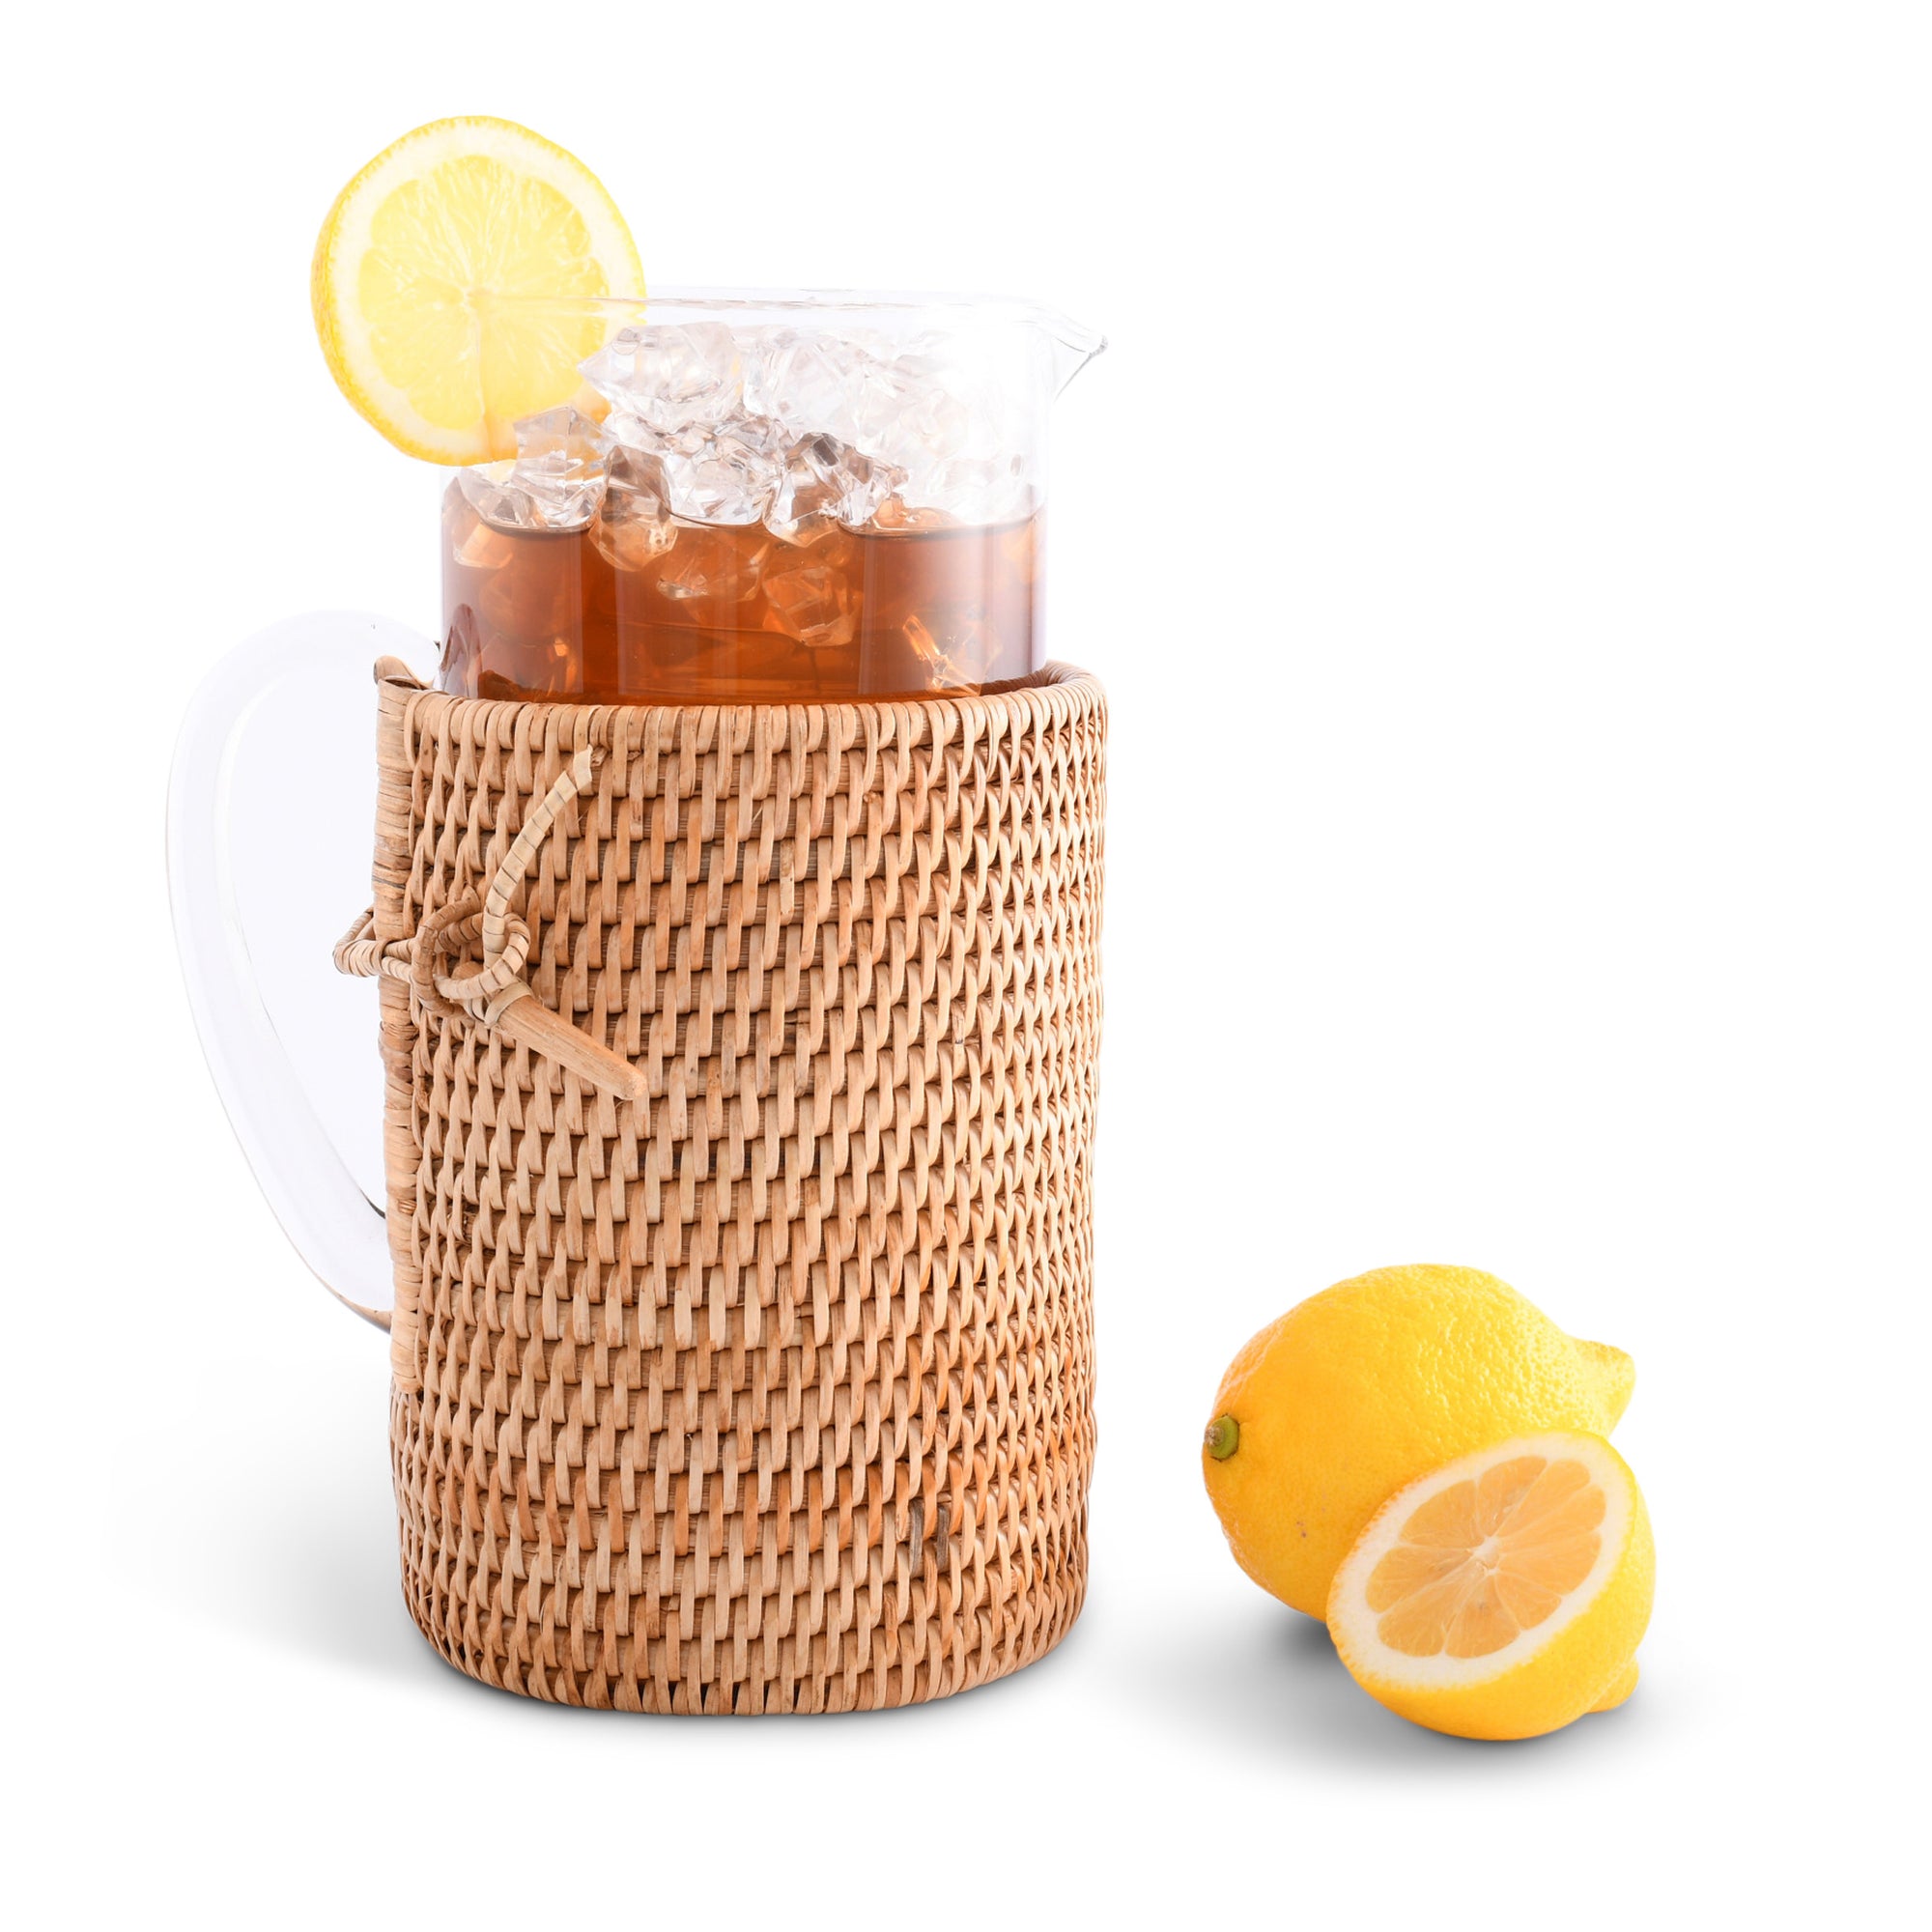 Vagabond House Glass Pitcher Hand Woven Wicker Natural Rattan Cover Product Image